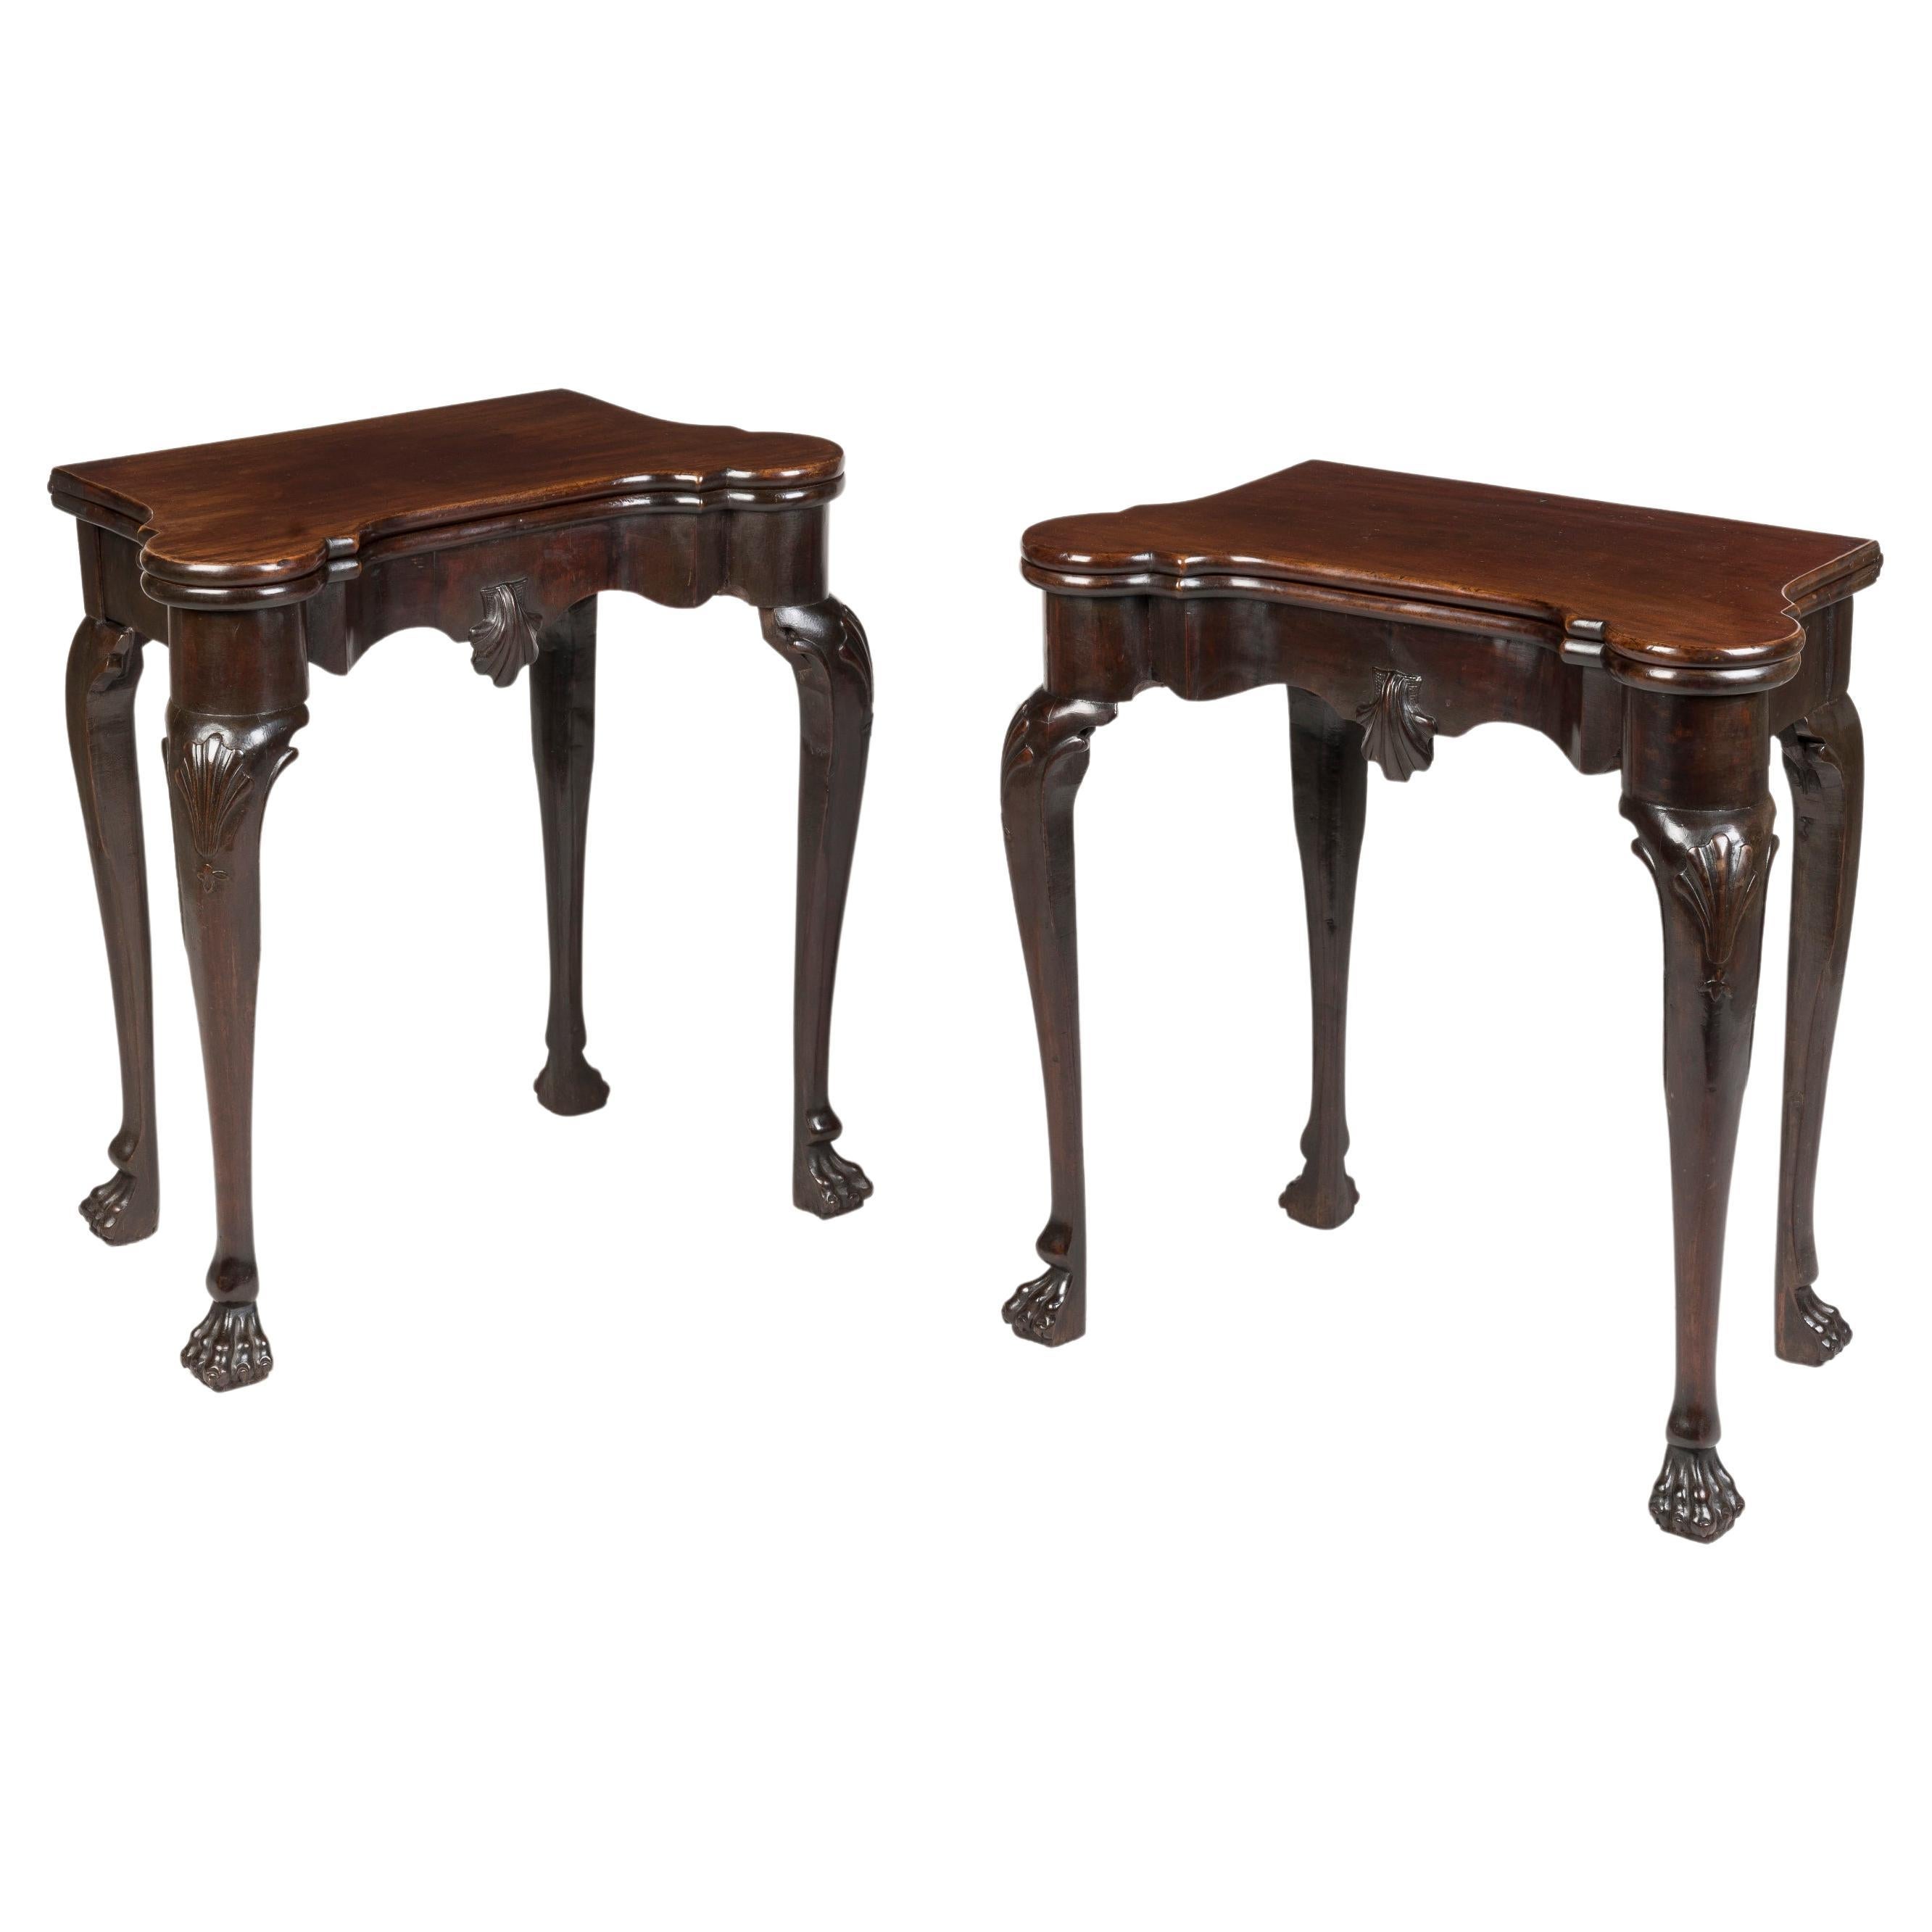 Pair of Small 18th Century George II Mahogany Card Tables